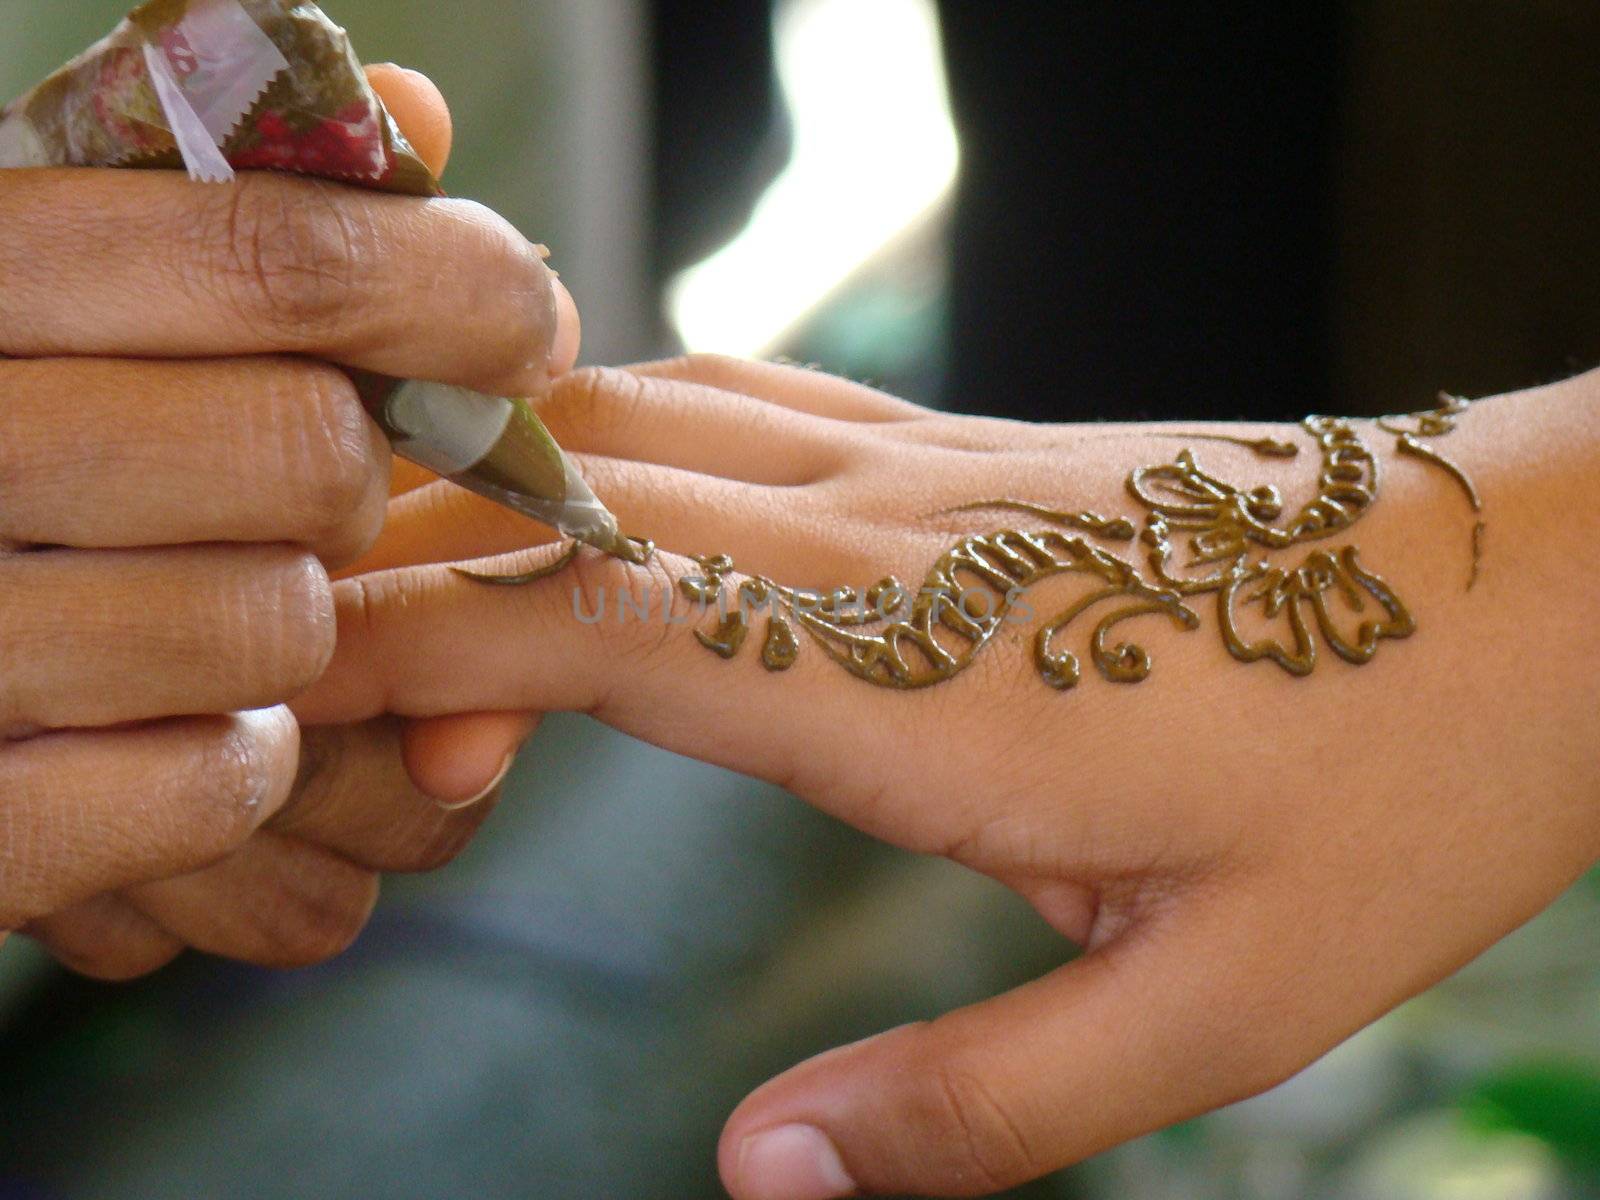 appling henna tattoo to hands